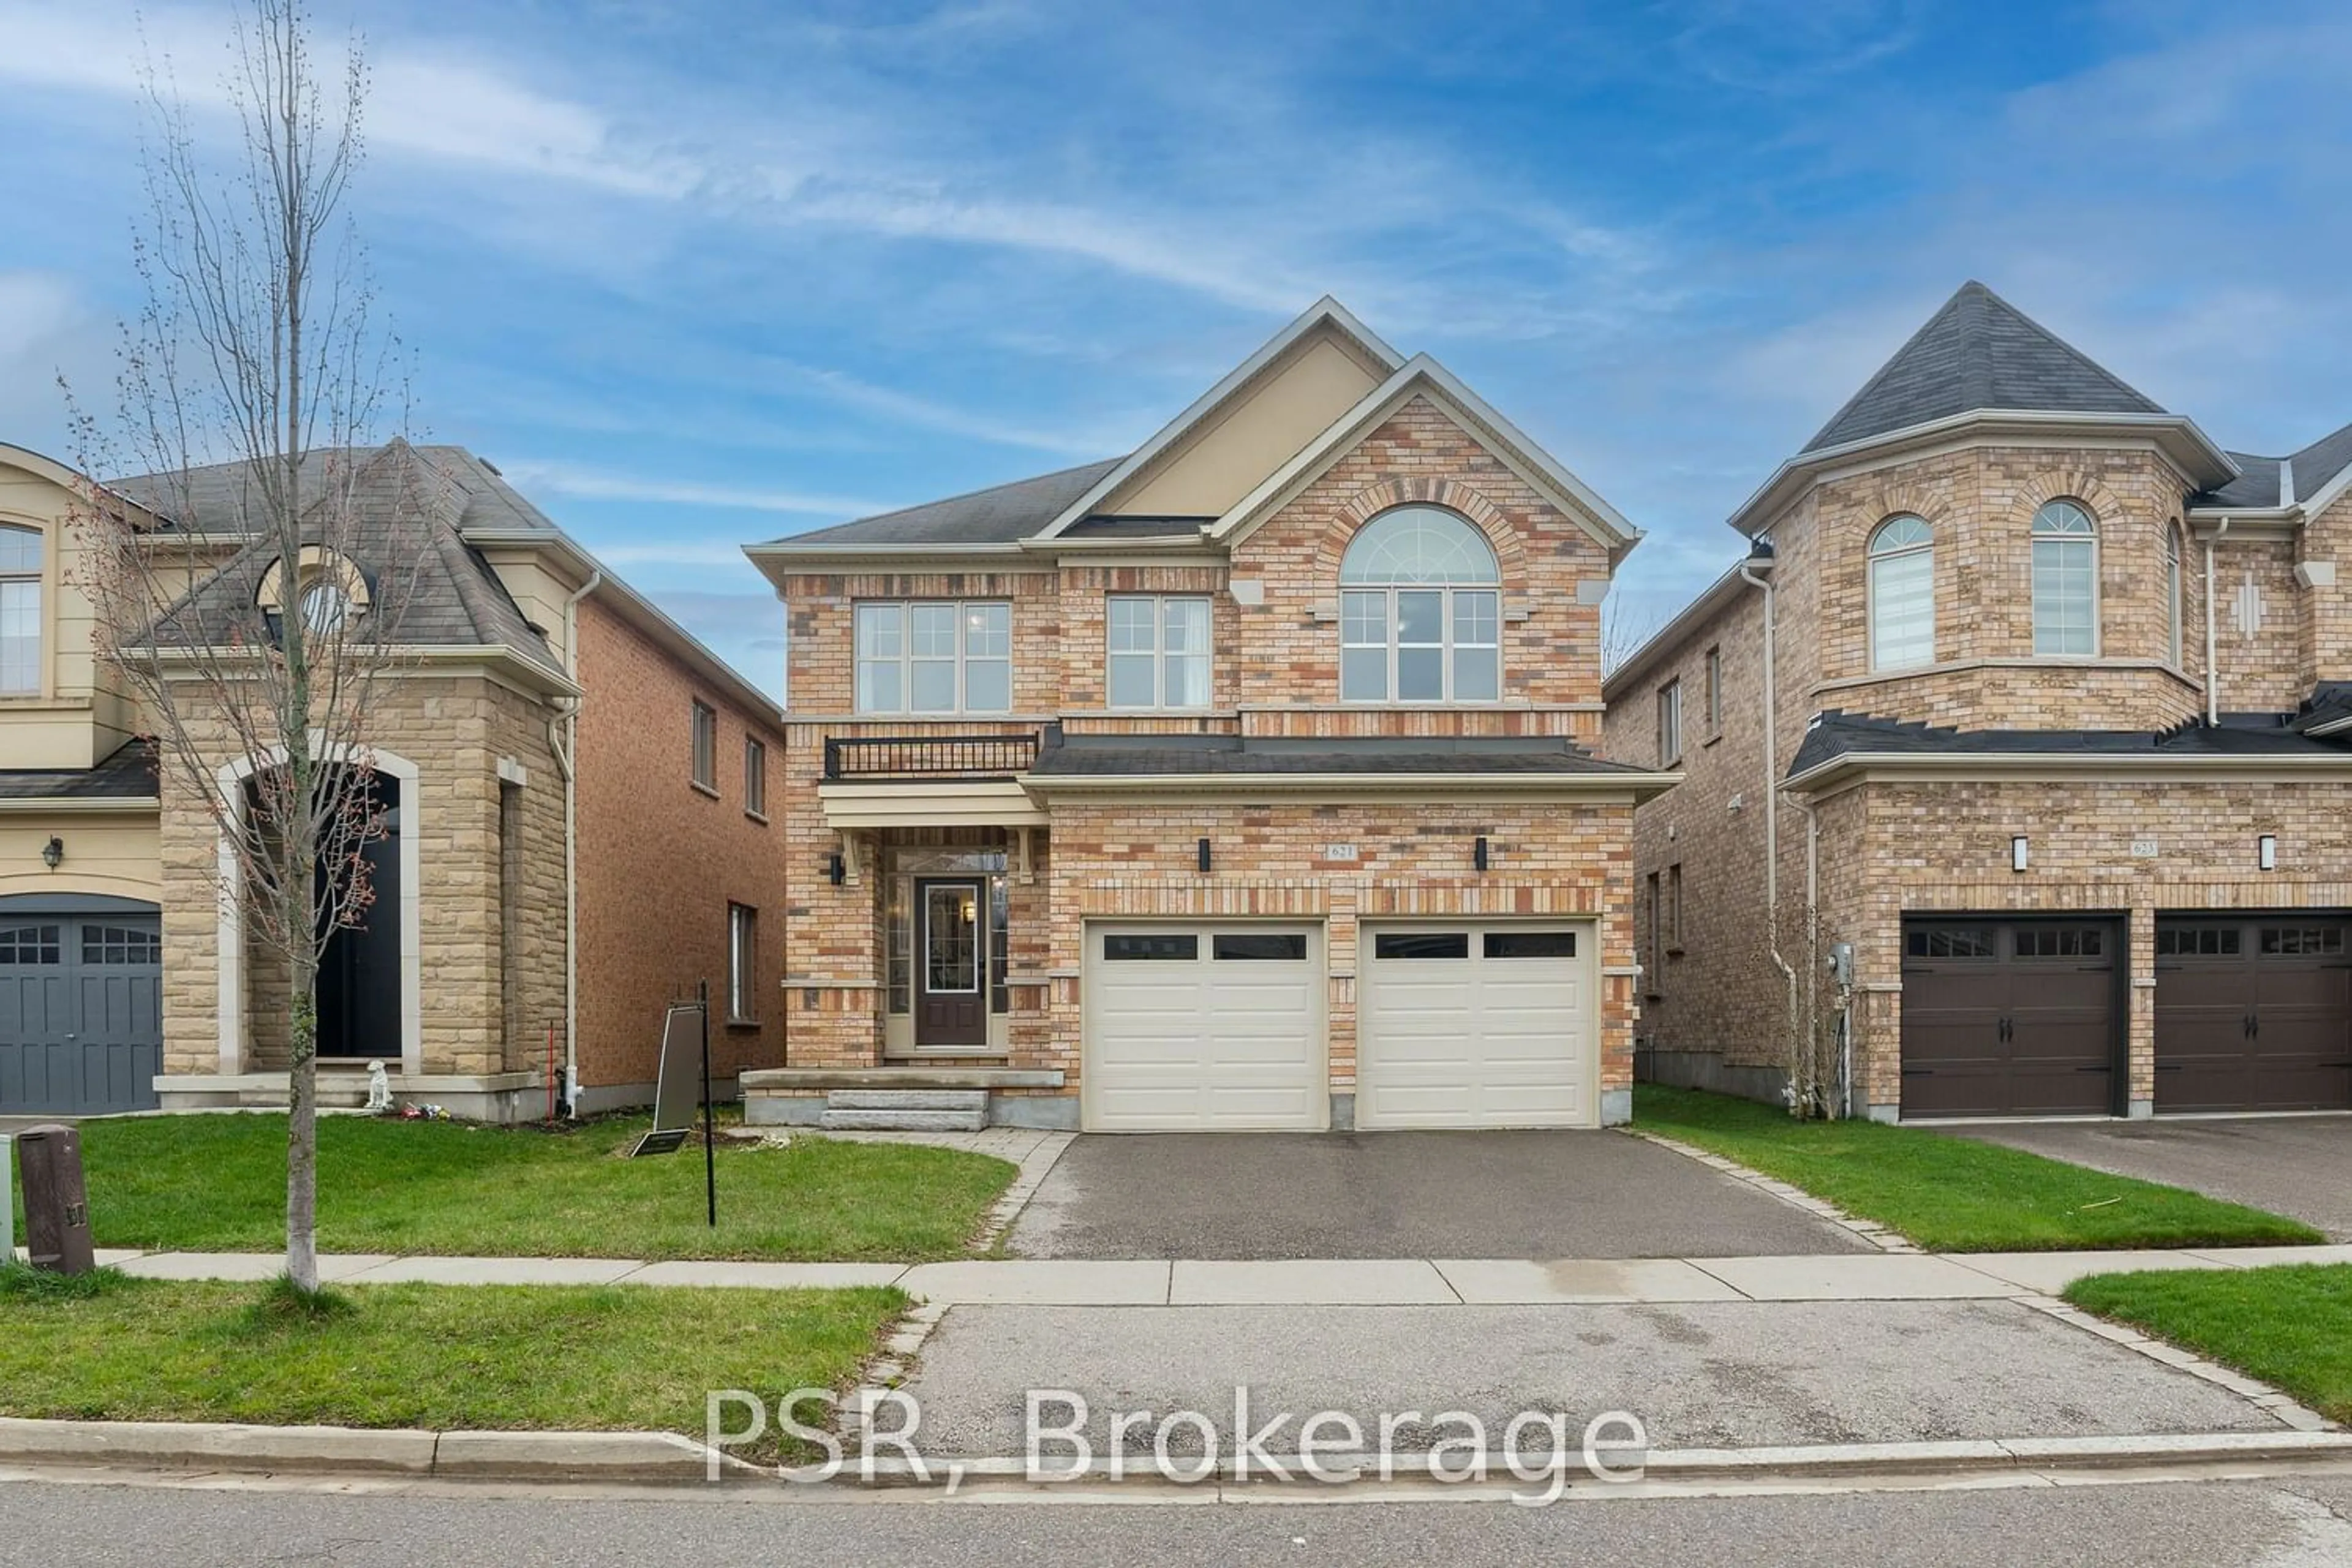 Home with brick exterior material for 621 Pinery Tr, Waterloo Ontario N2V 2Y6